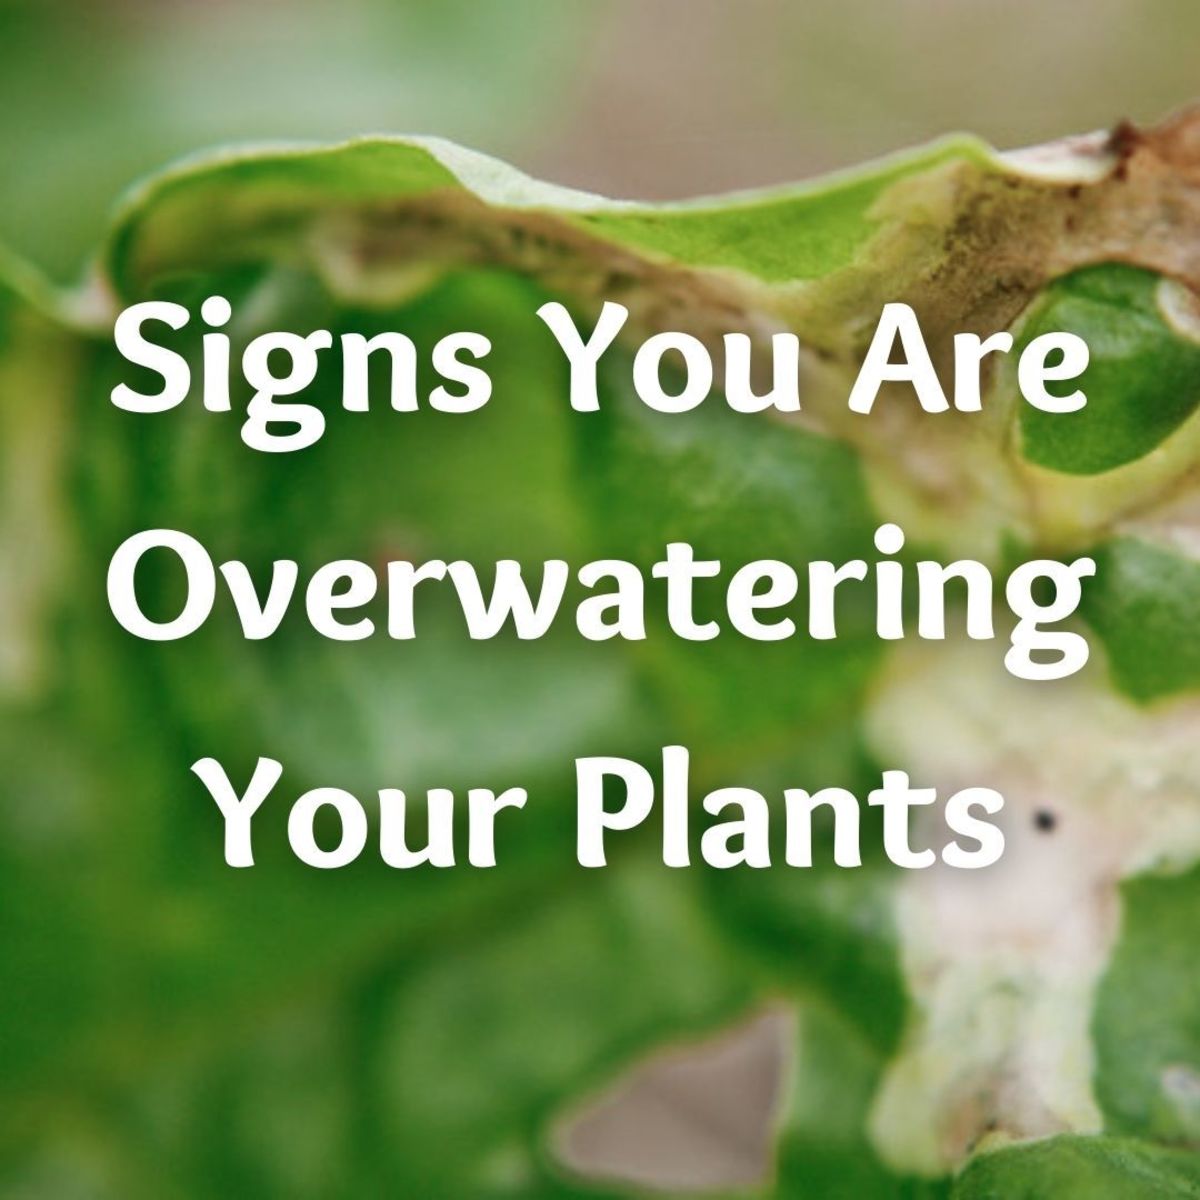 If your plants are getting brown at the ends, you may be overwatering them.